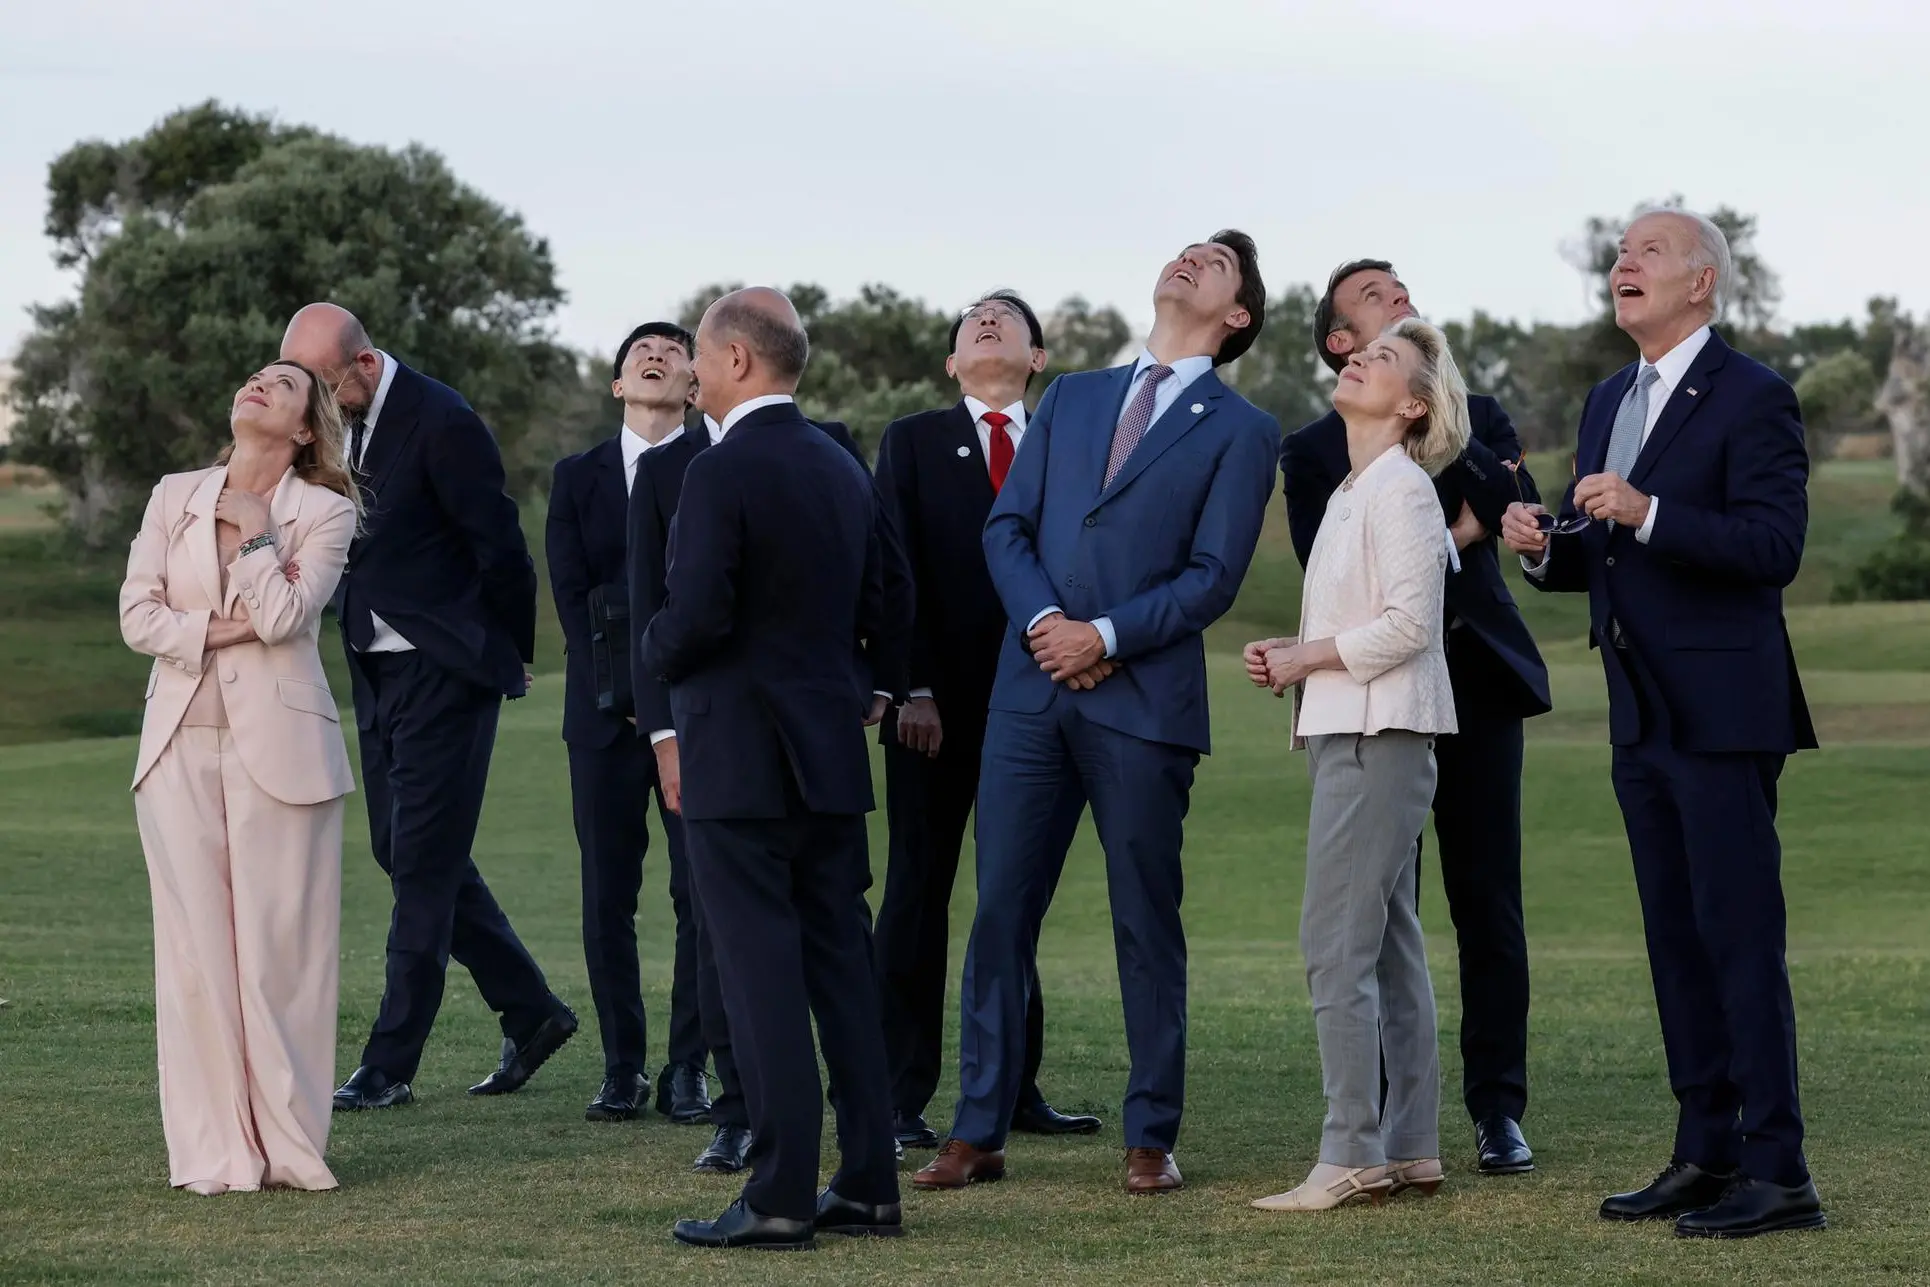 (L-R) Italian Prime Minister Giorgia Meloni, European Council President Charles Michel, German Chancellor Olaf Scholz, Japan's Prime Minister Fumio Kishida, Canada's Prime Minister Justin Trudeau, French President Emmanuel Macron, European Commission President Ursula von der Leyen and U.S. President Joe Biden attend a Flag ceremony during of the G7 Summit in Borgo Egnazia (Brindisi), southern Italy, 13 June 2024. The G7 Borgo Egnazia Summit will be held from 13 to 15 June 2024. ANSA/GIUSEPPE LAMI